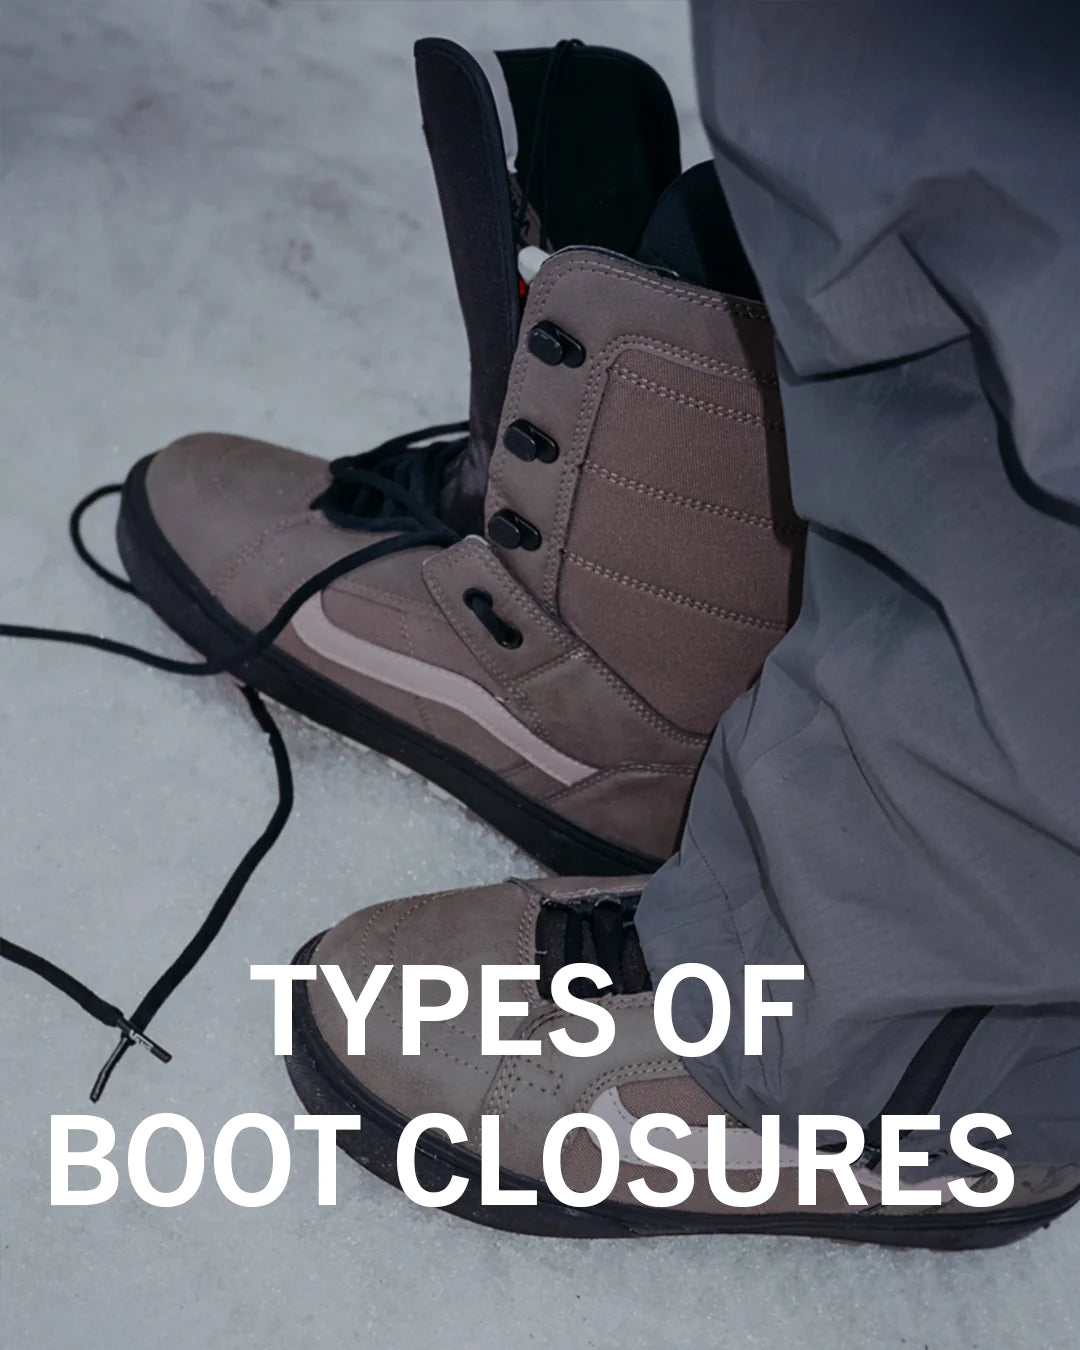 Types of Boot Closures